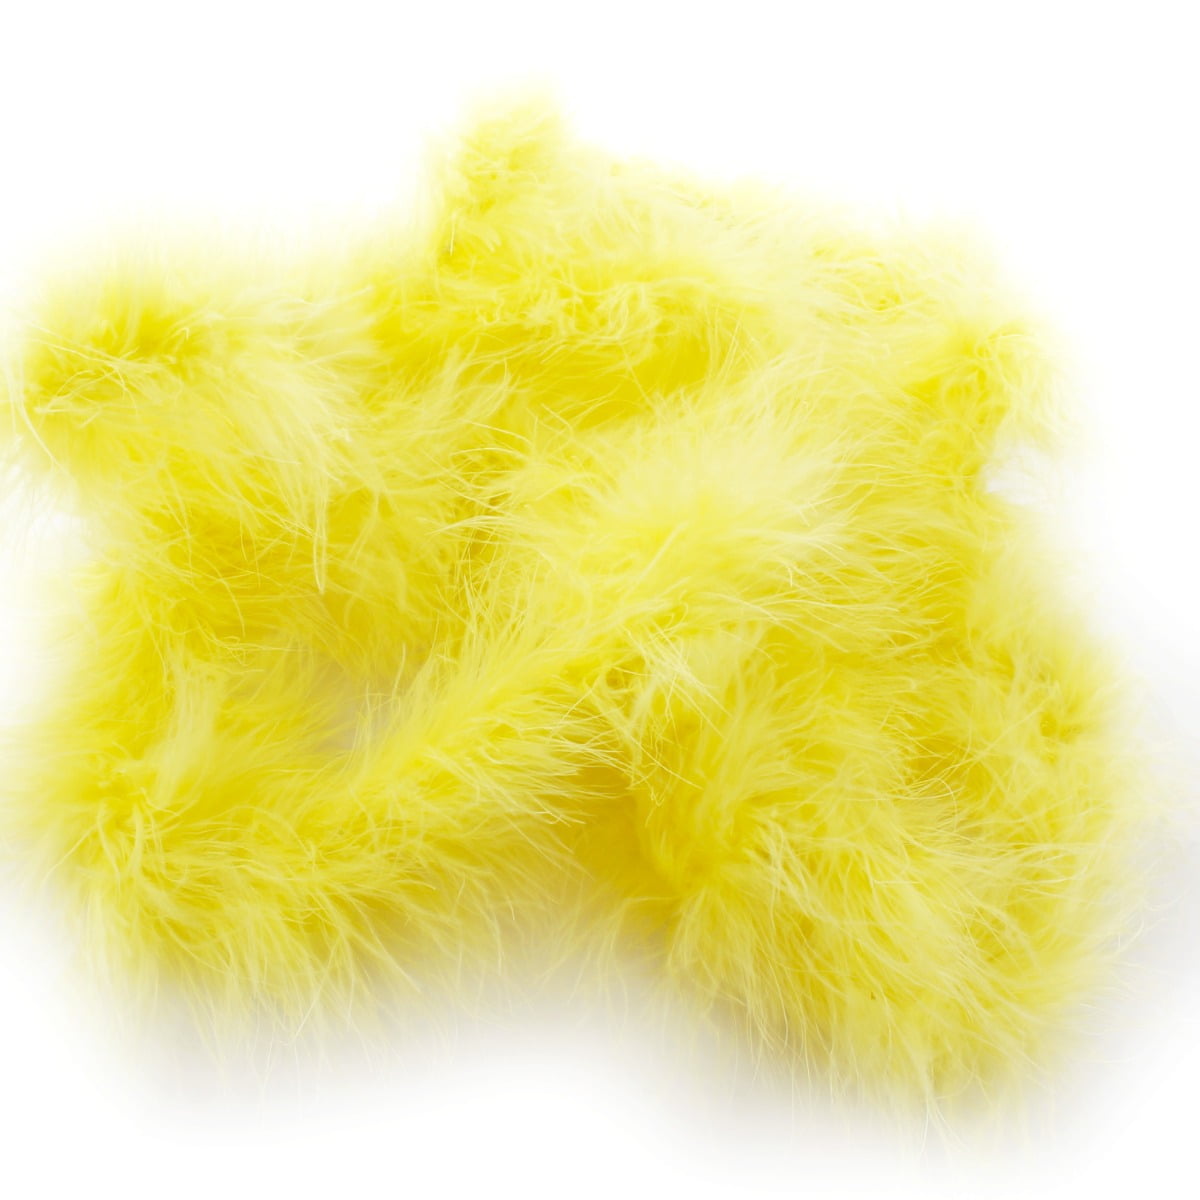 Quality Marabou Feathers JET BLACK Fluffy 3-8 L 7 grams Approx 35 ct 